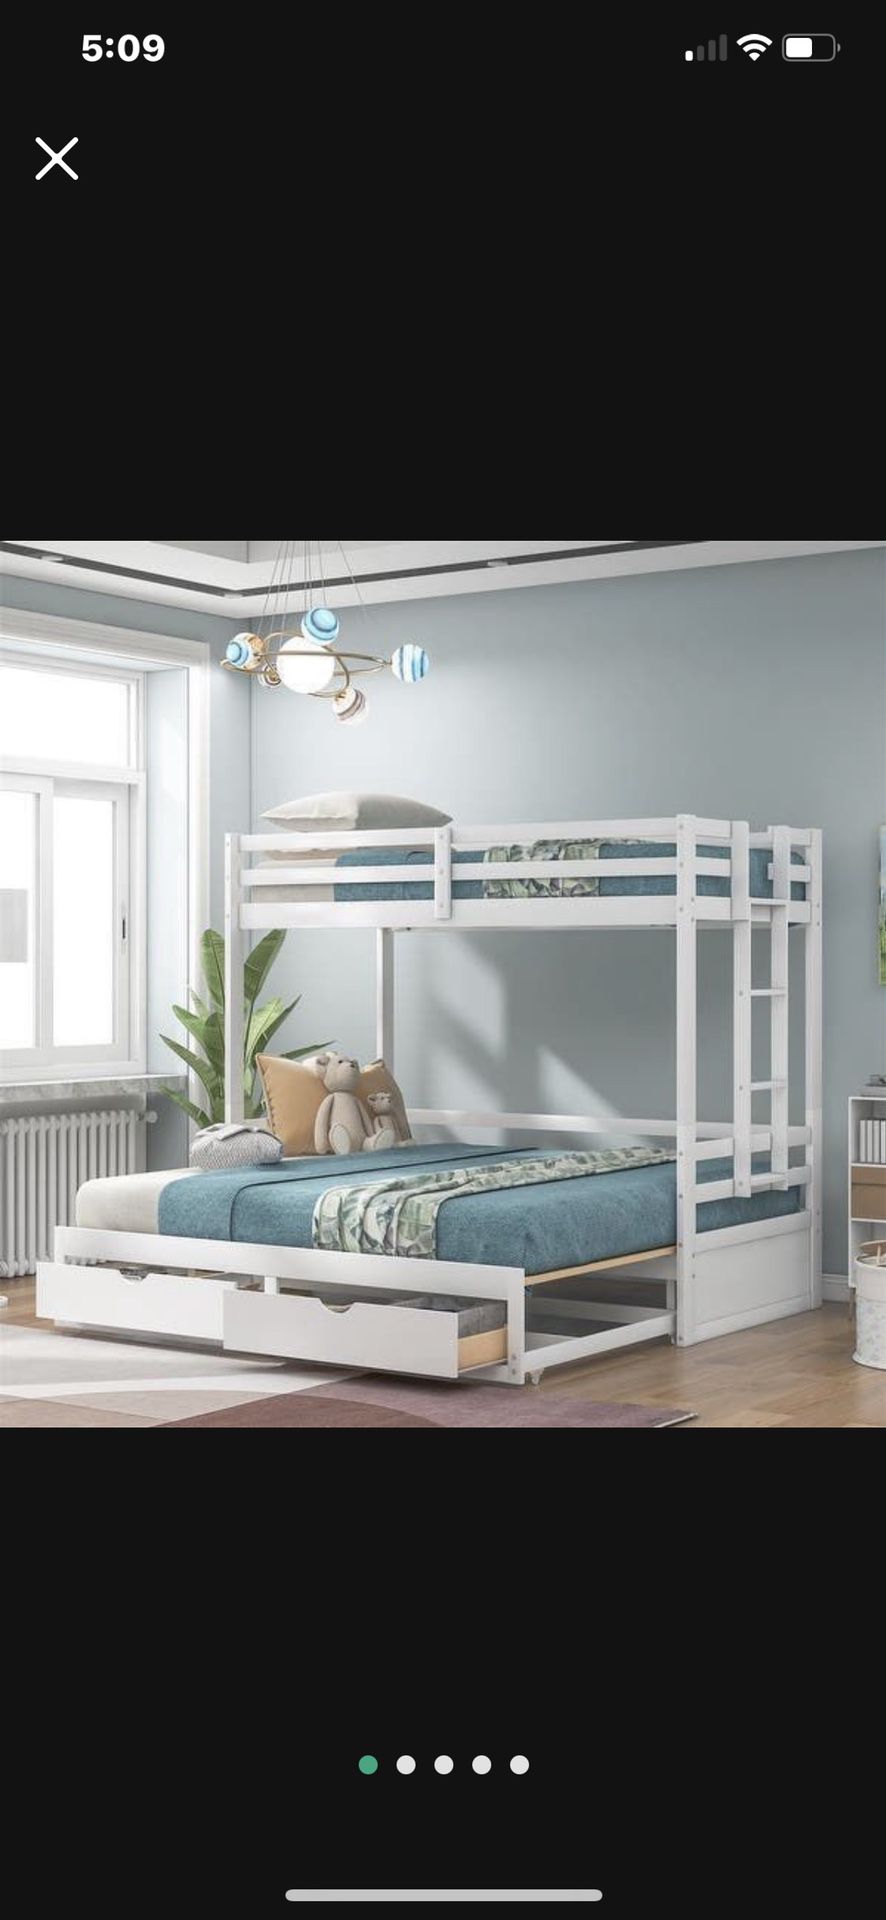 Brand New In Box Bunk Bed, No Mattresses 